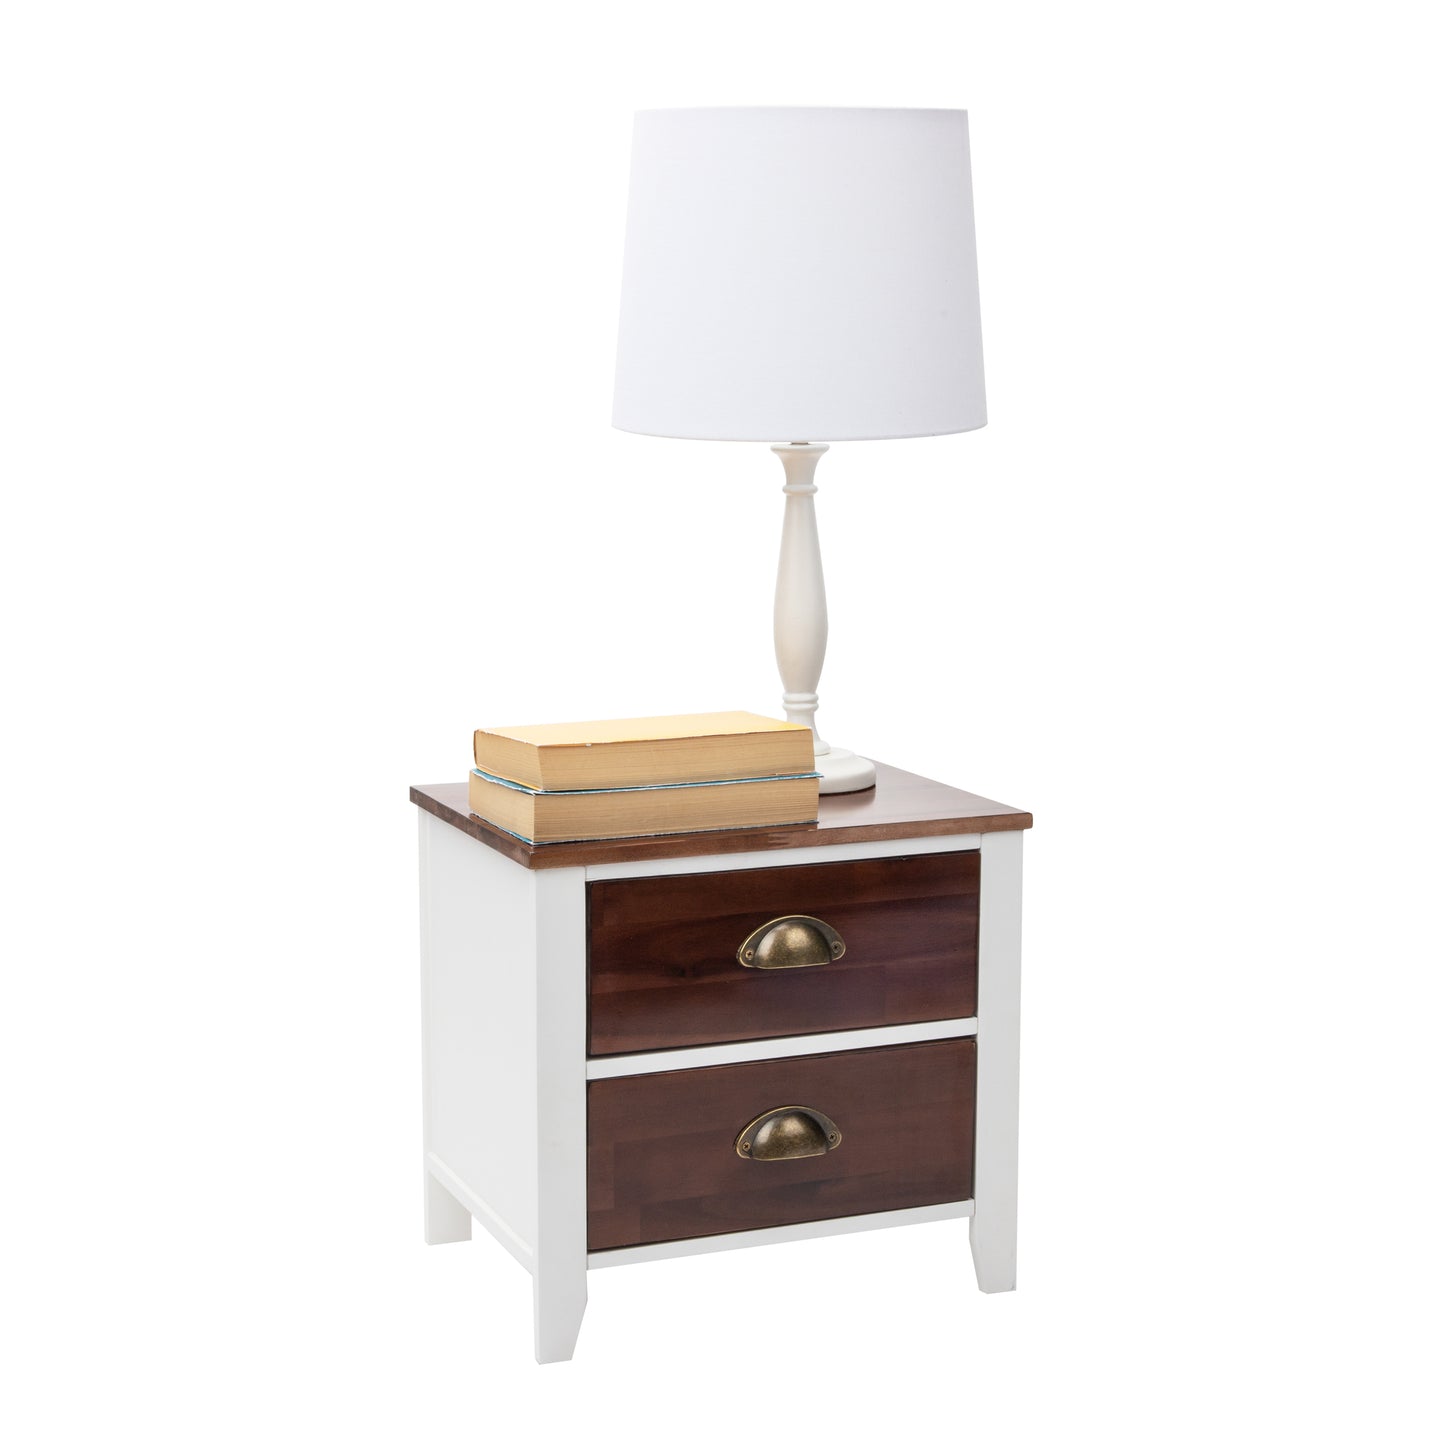 Mind Reader Nightstand, Side Table, Bedside Table, End Table, Drawers, Wood and Metal, 15"L x 11"W x 14"H, Brown and White